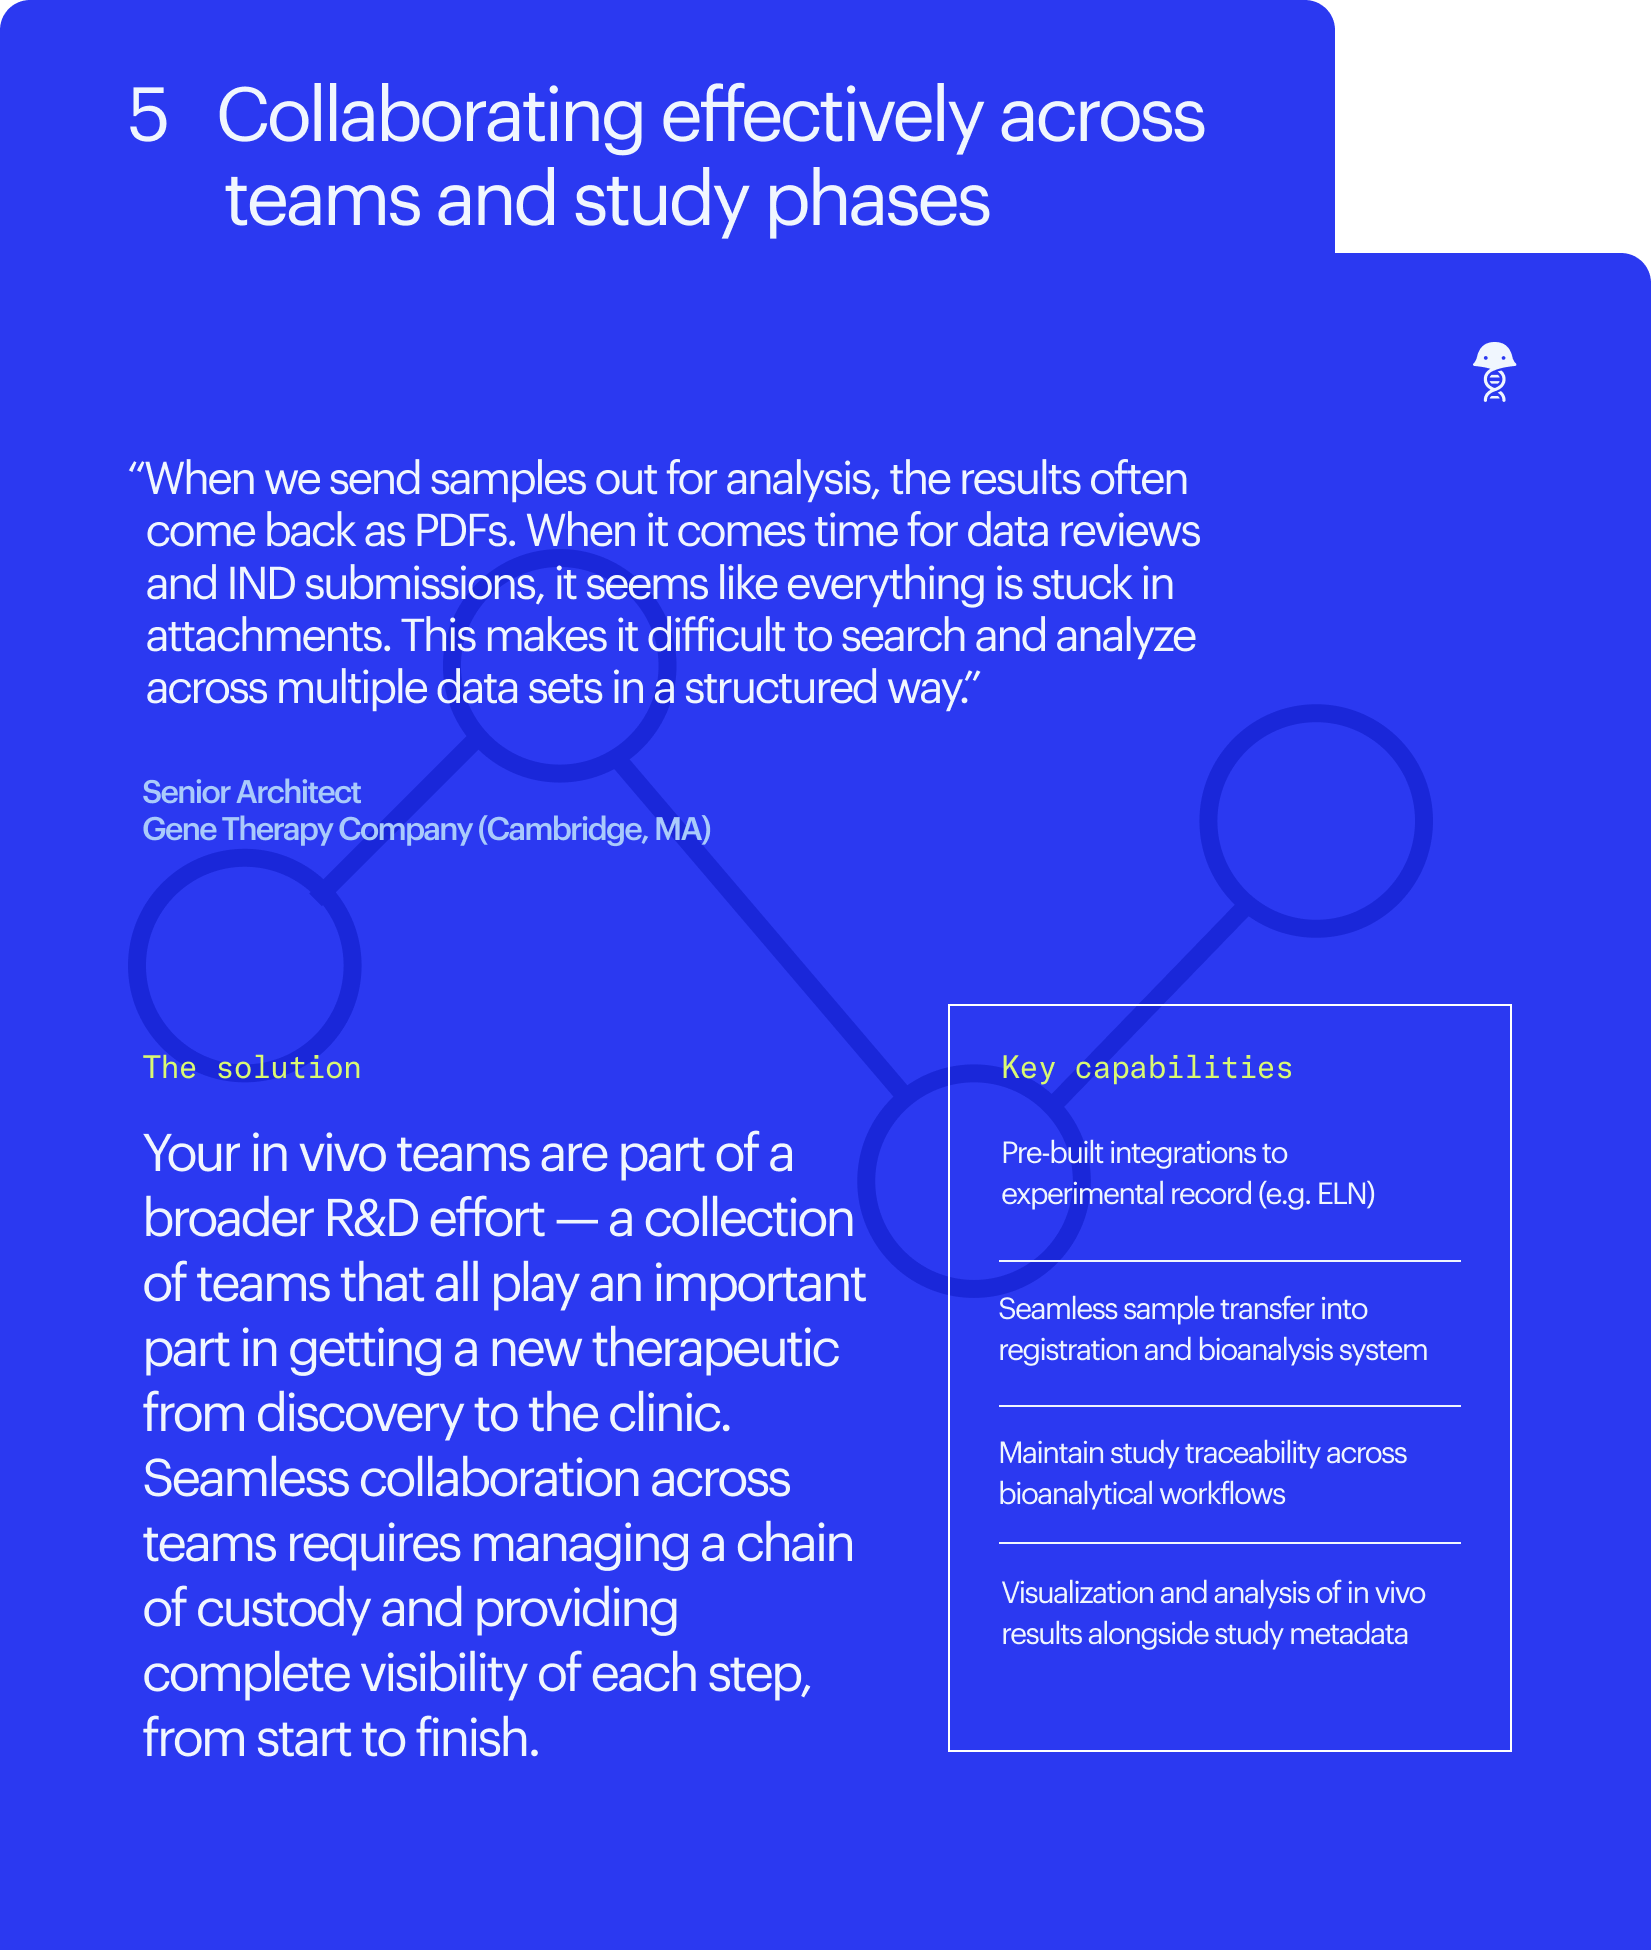 studies-infographic-5-collaborating-effectively-across-teams-and-study-phases